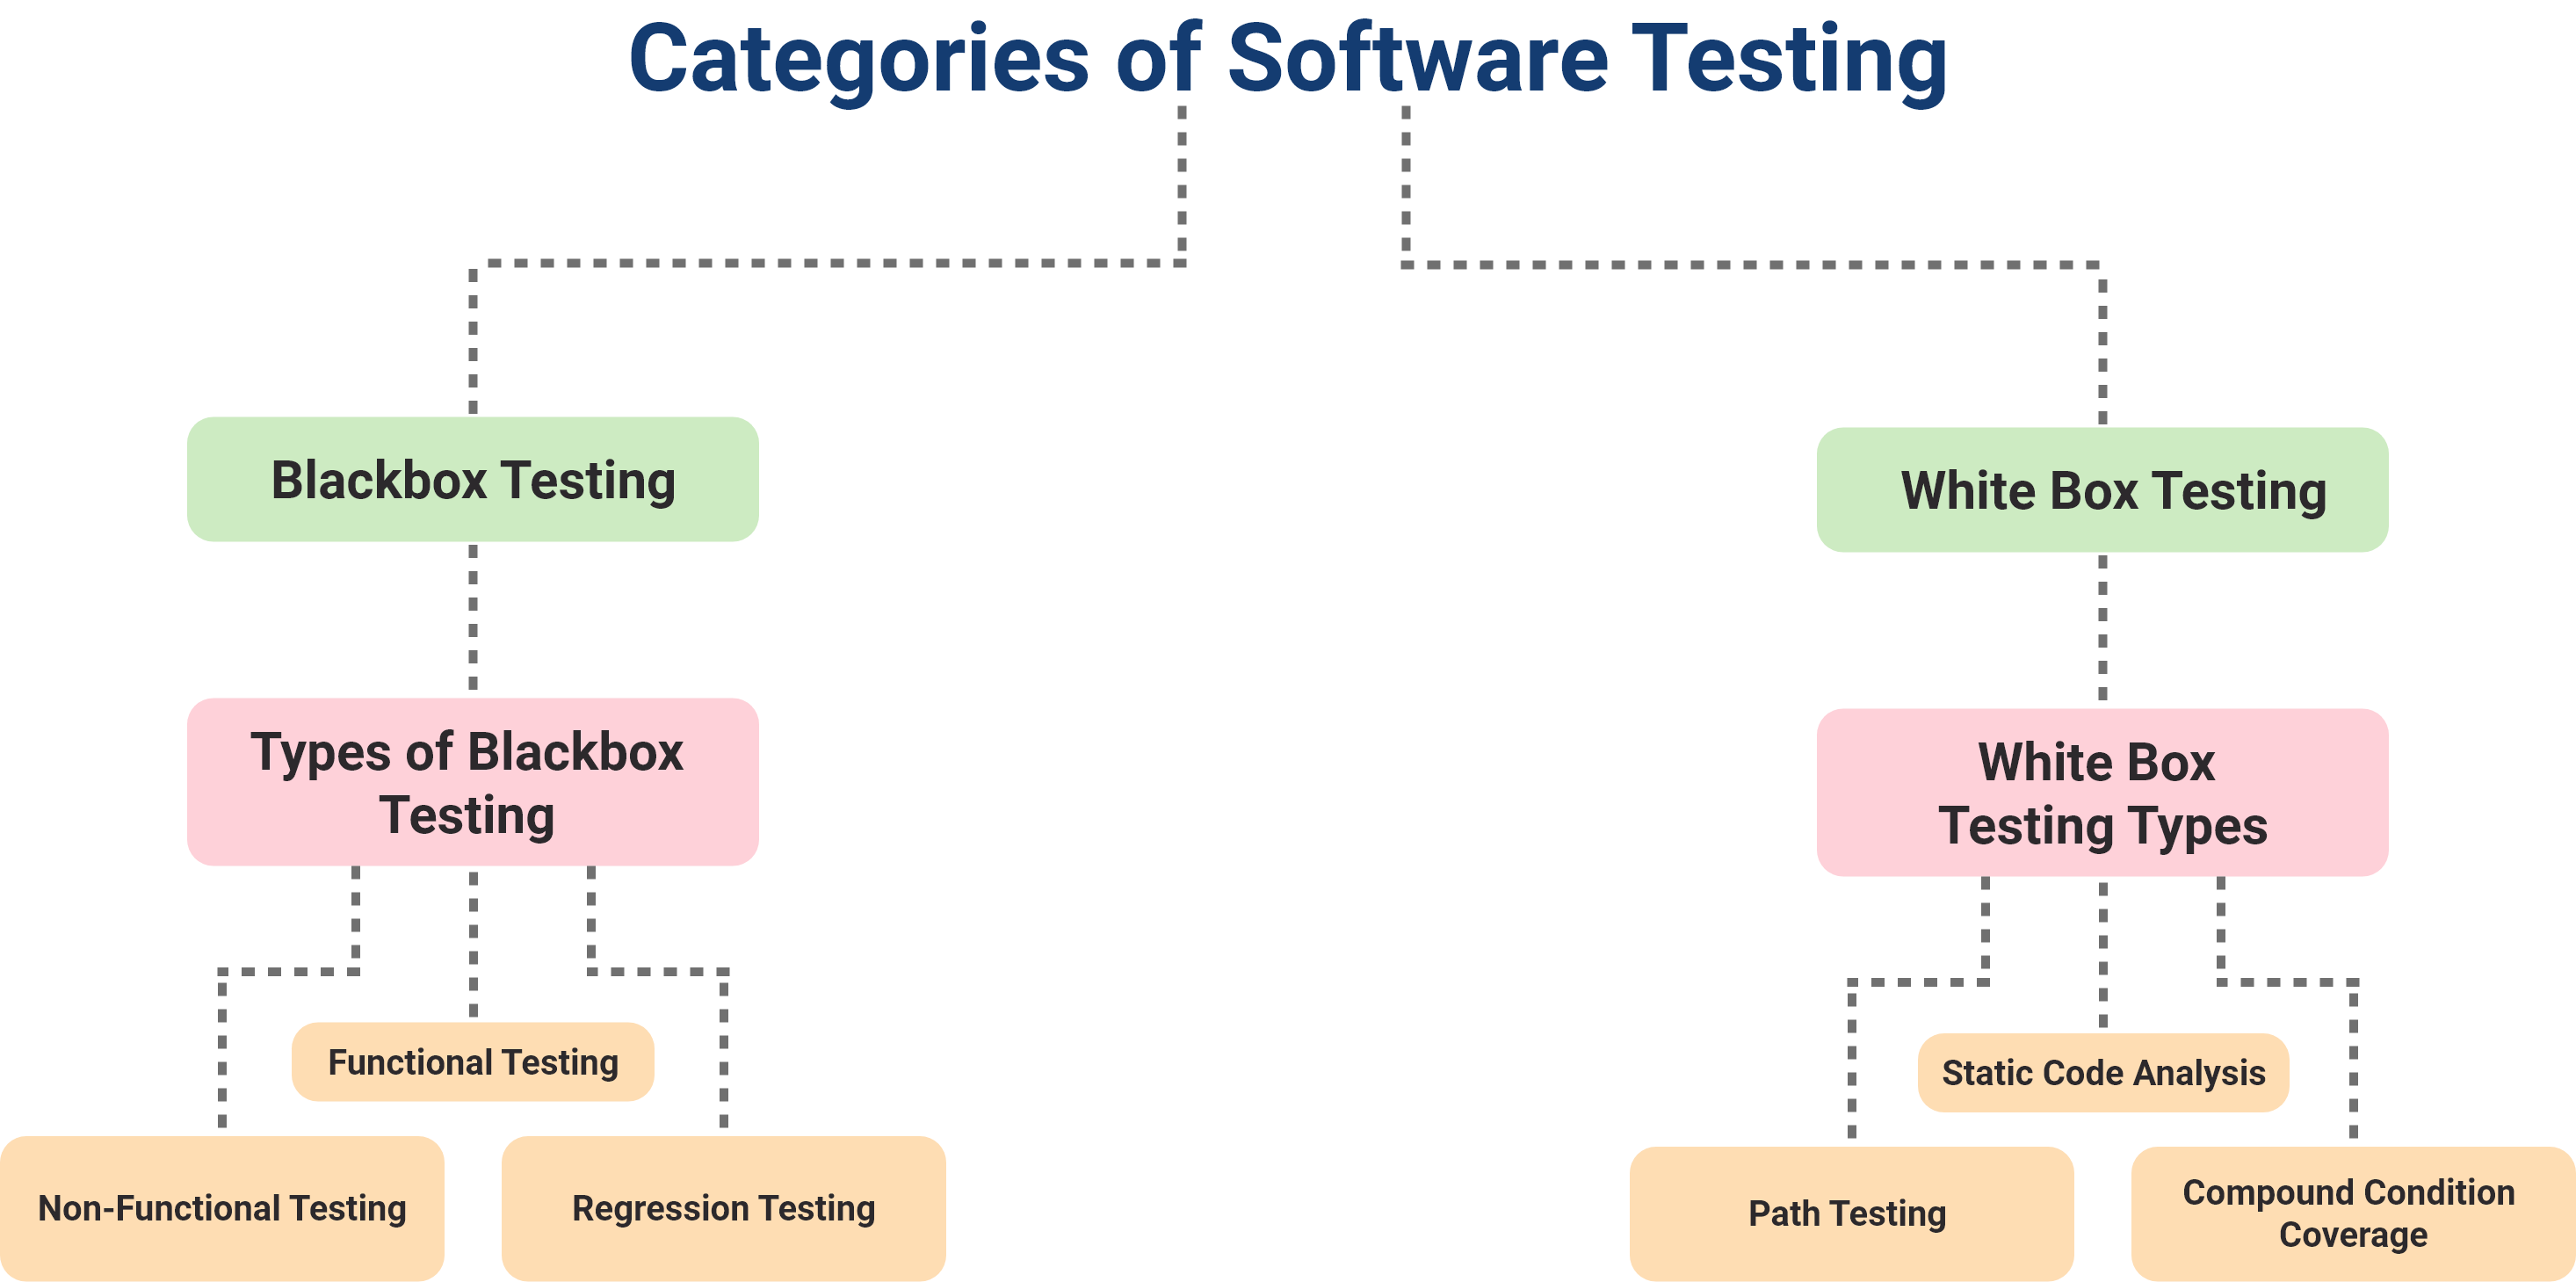 Categories of Software Testing